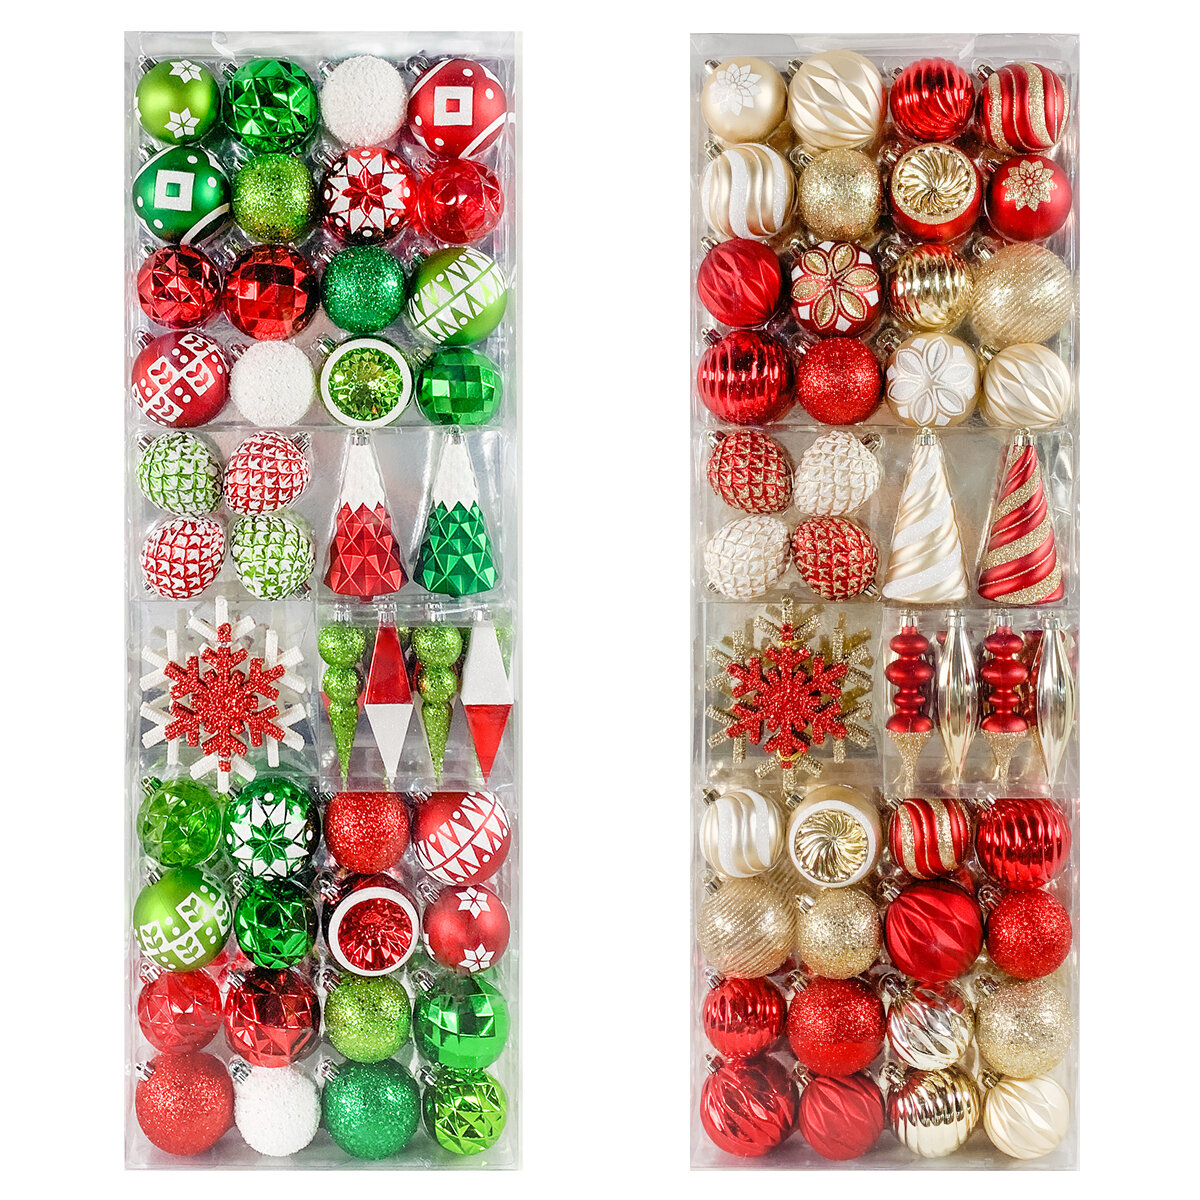 Buy 52 Piece Ornaments in Green or Gold Combined Image at Costco.co.uk